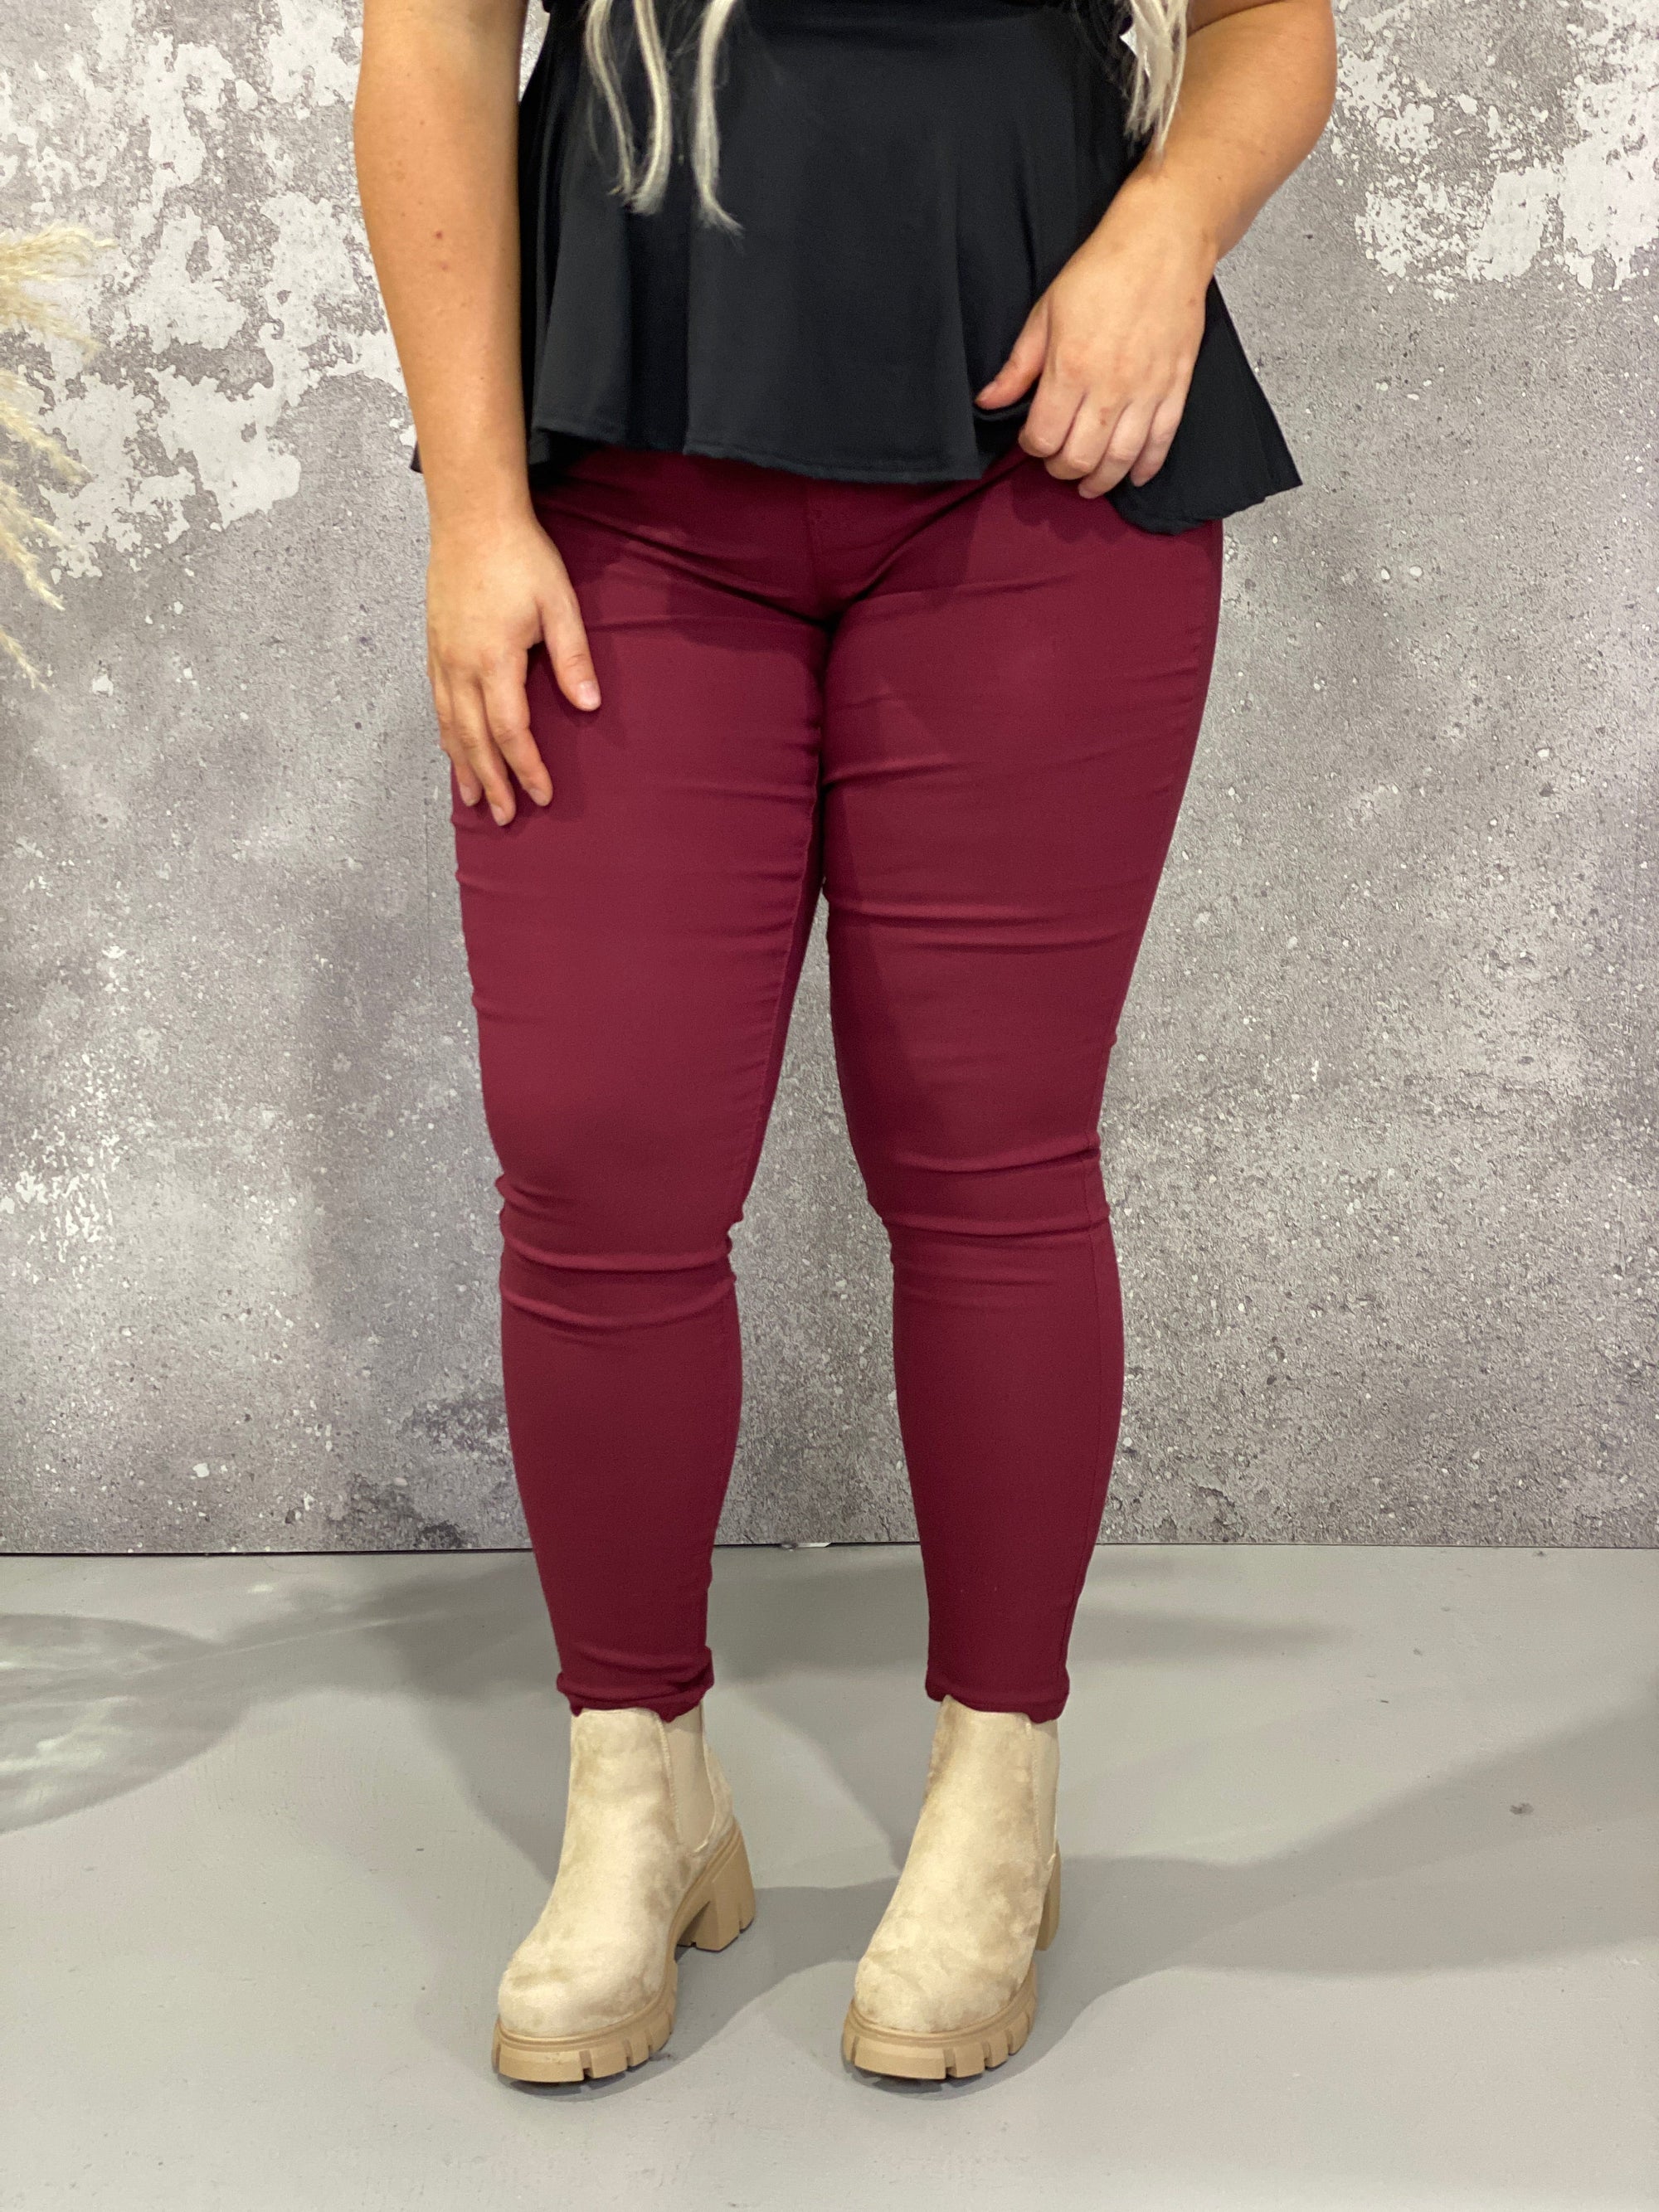 Hyperstretch Colored Skinny Mid rise Pant - Dark Wine - (Small - 3X) - FINAL SALE